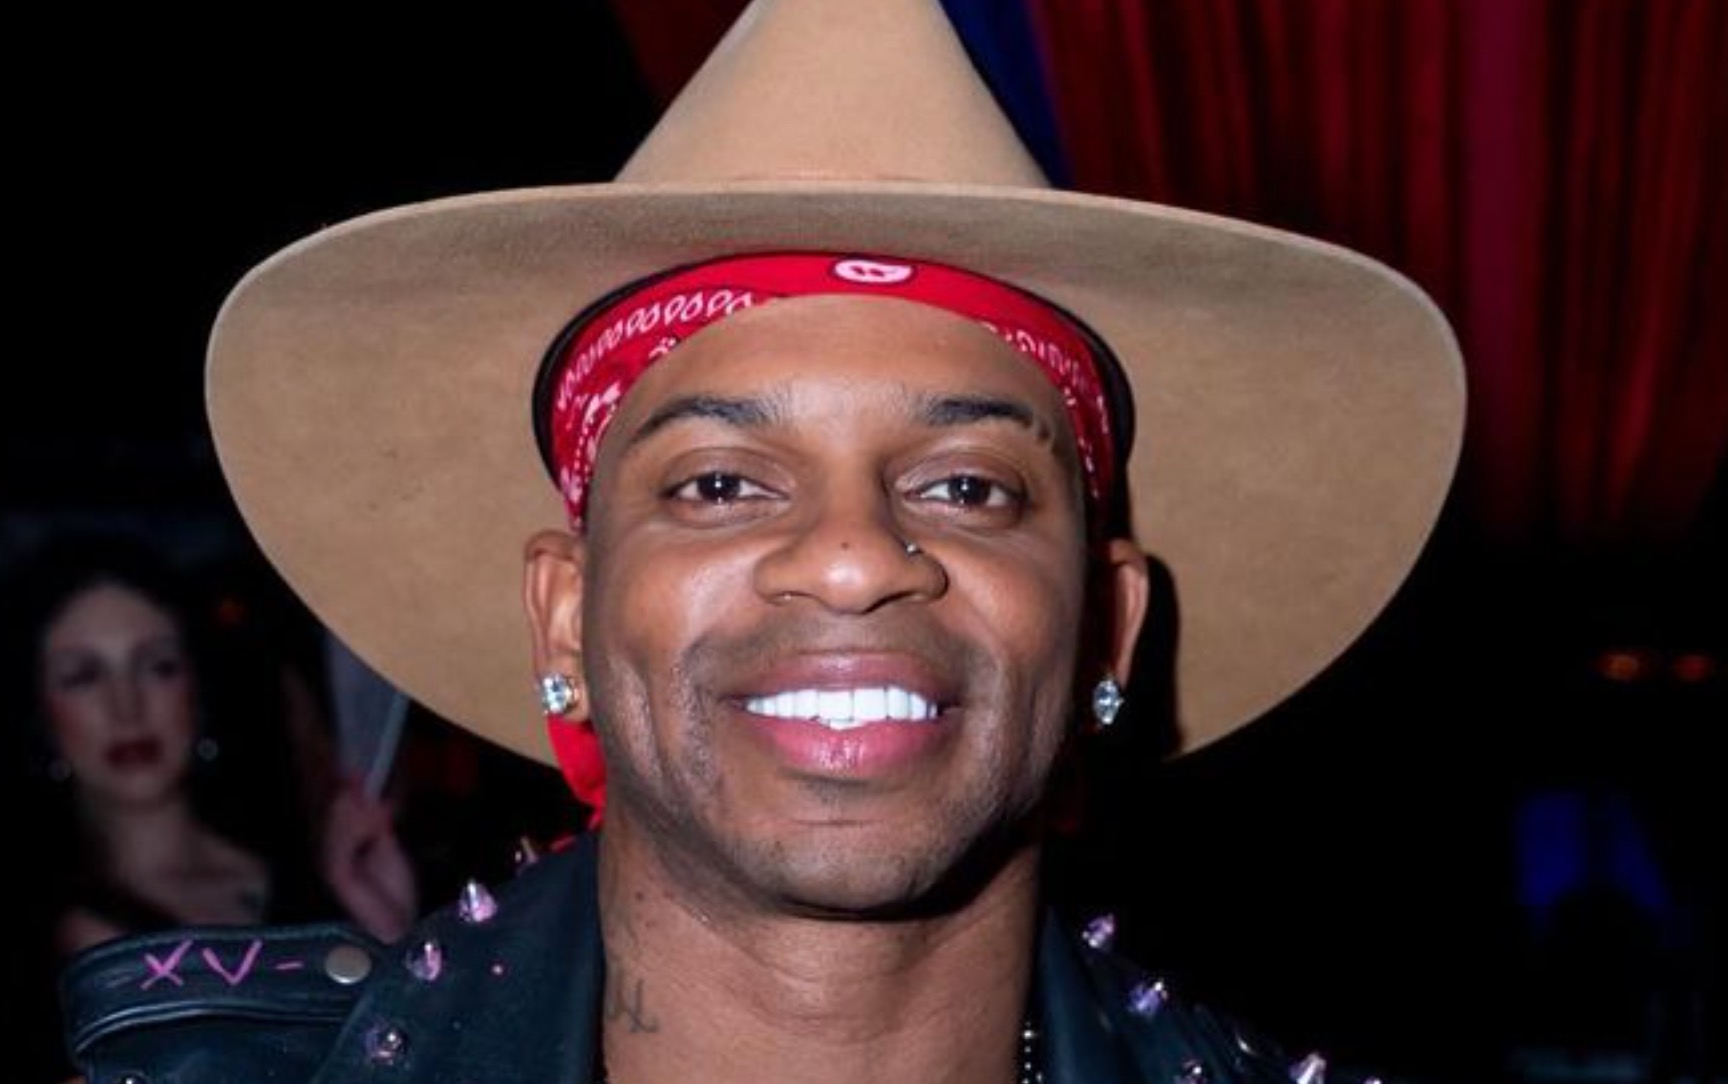 Jimmie Allen Seemingly Reveals He Secretly Welcomed Twins Into His Life During His Divorce From Ex-Wife | Ten months after issuing an apology to his then-pregnant ex-wife, Jimmie Allen has seemingly revealed he quietly welcomed a set of twins into his life.